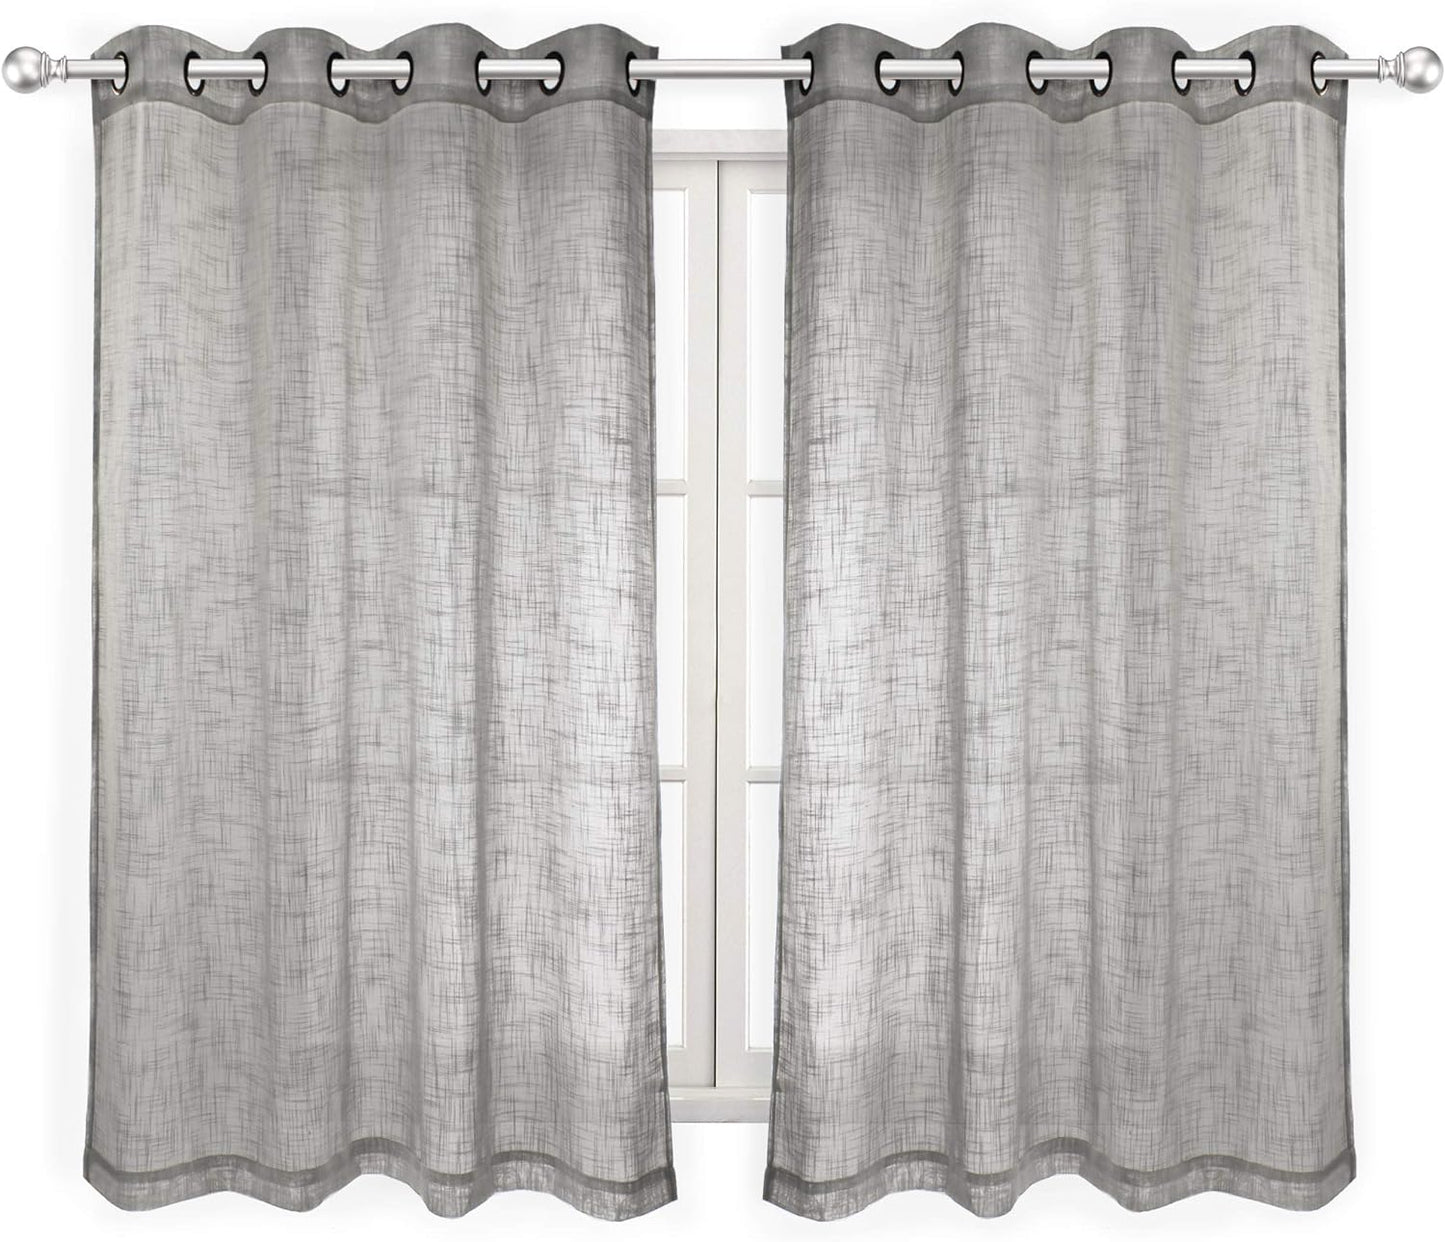 VOILYBIRD Palma Light Filtering Drapes Natural Linen Blended Semi Sheer Curtains 84 Inches Long Bronze Grommet for Bedroom (Natural, 52" W X 84" L, 2 Panels)  VOILYBIRD Grey 52"W X 63"L 